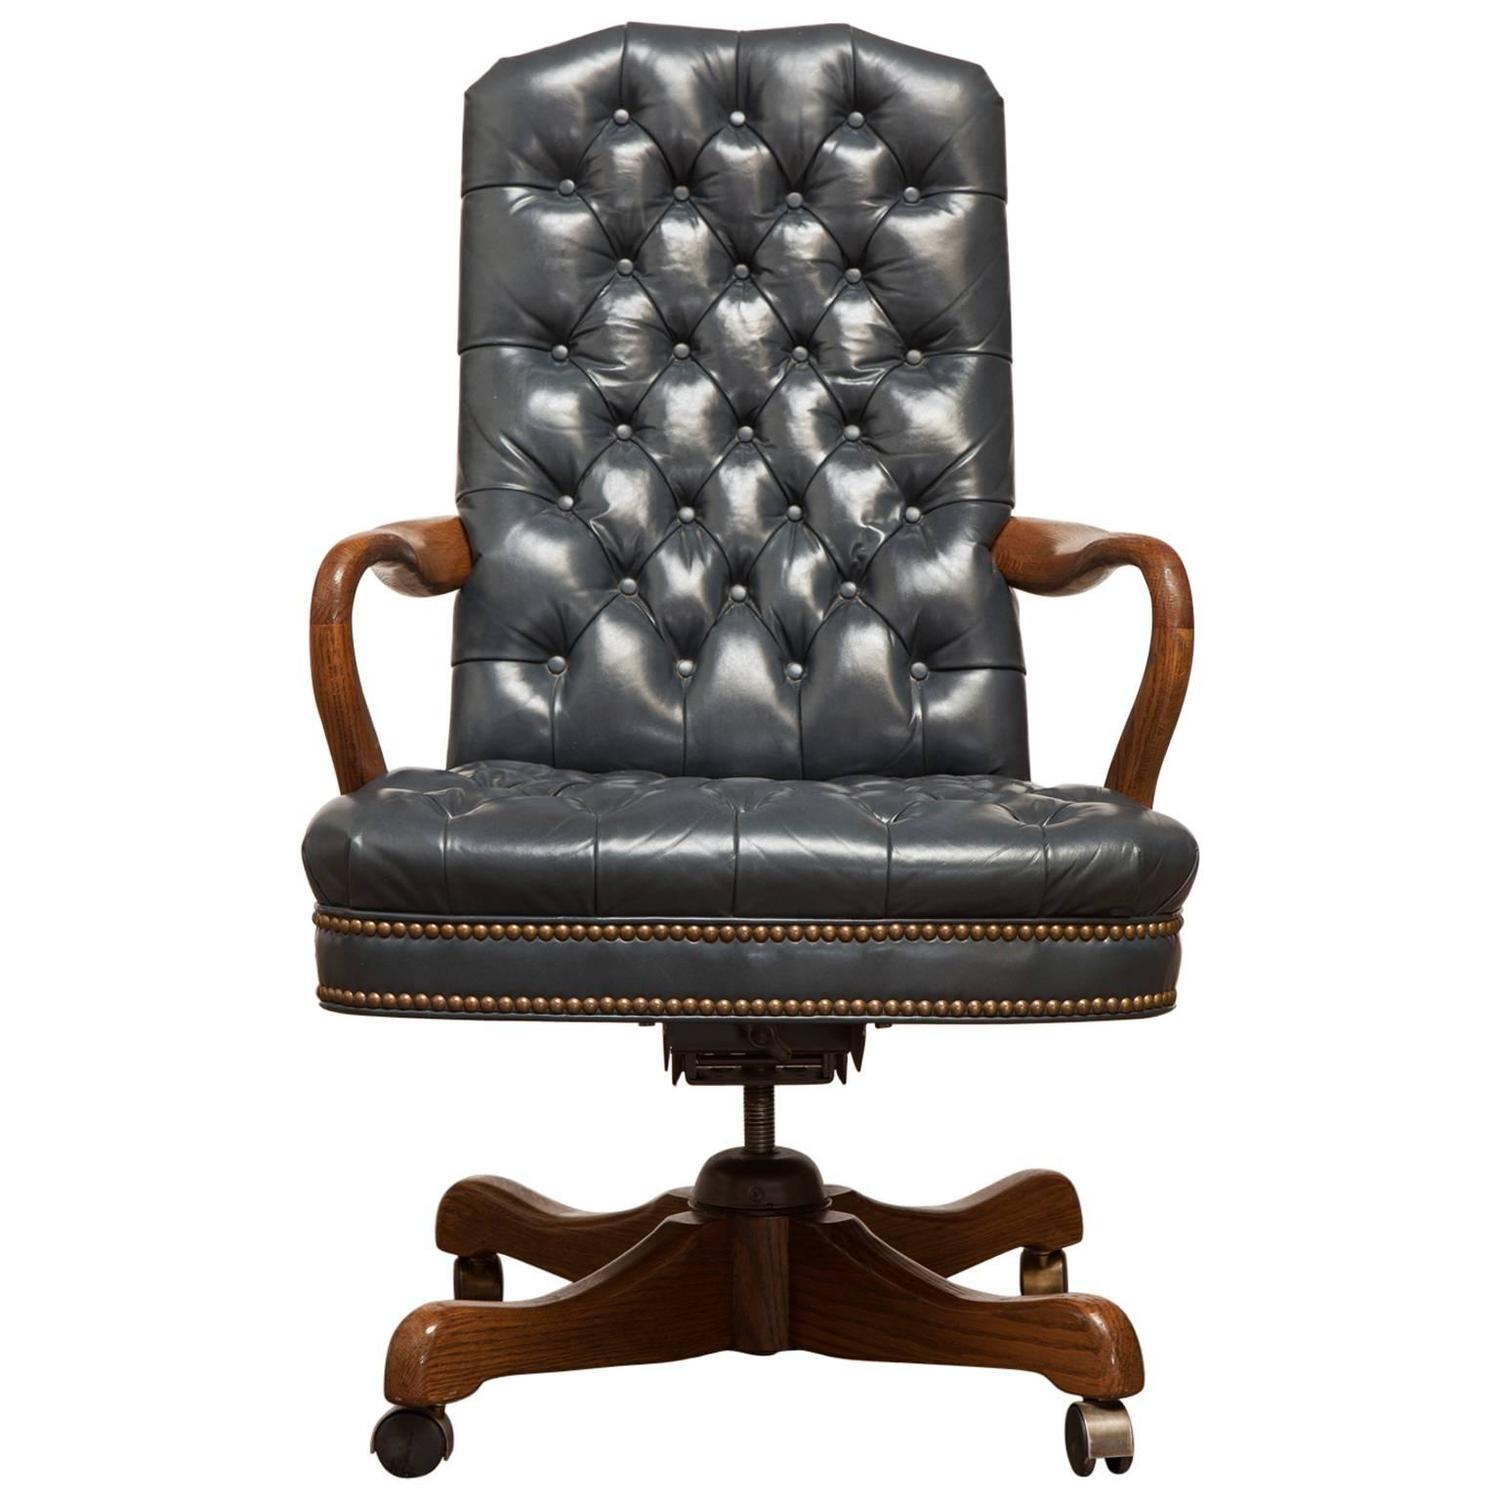 Fine Tufted Leather Desk Chair by Schafer Brothers For Sale at 1stdibs